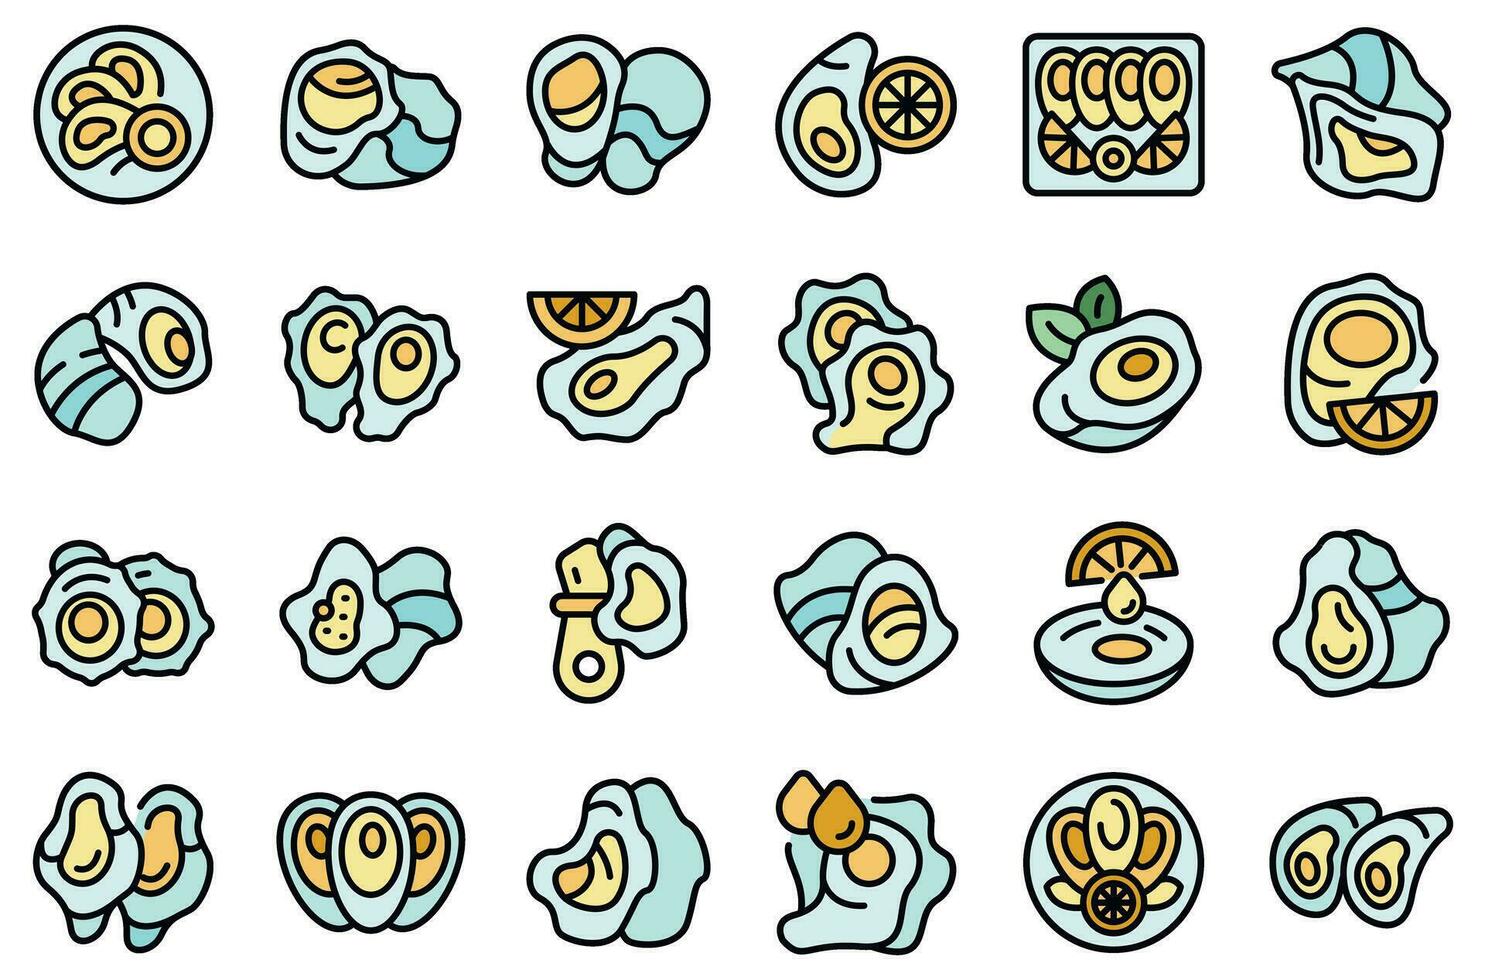 Oysters icons set vector flat